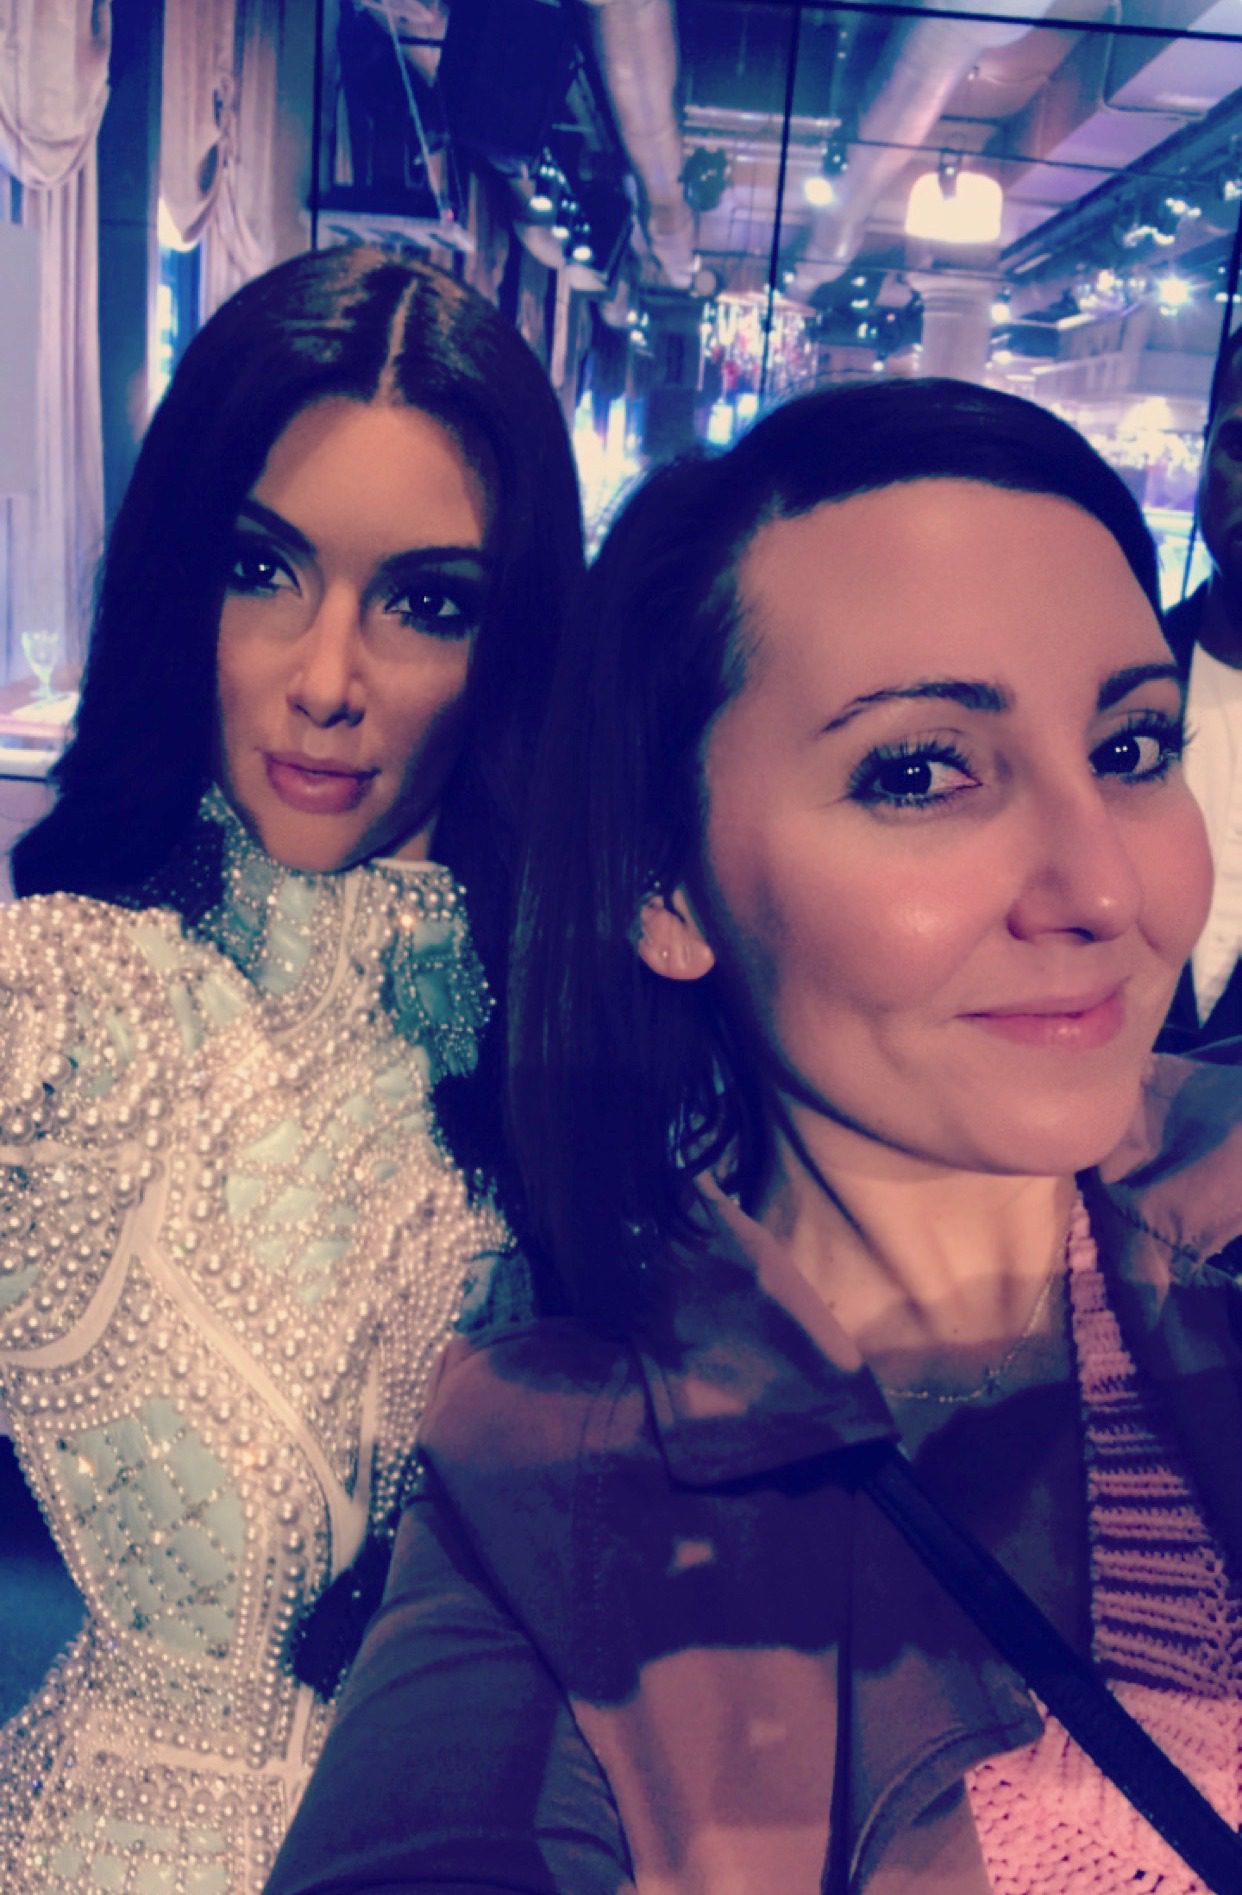 Selfies With the Stars, at Madame Tussauds London